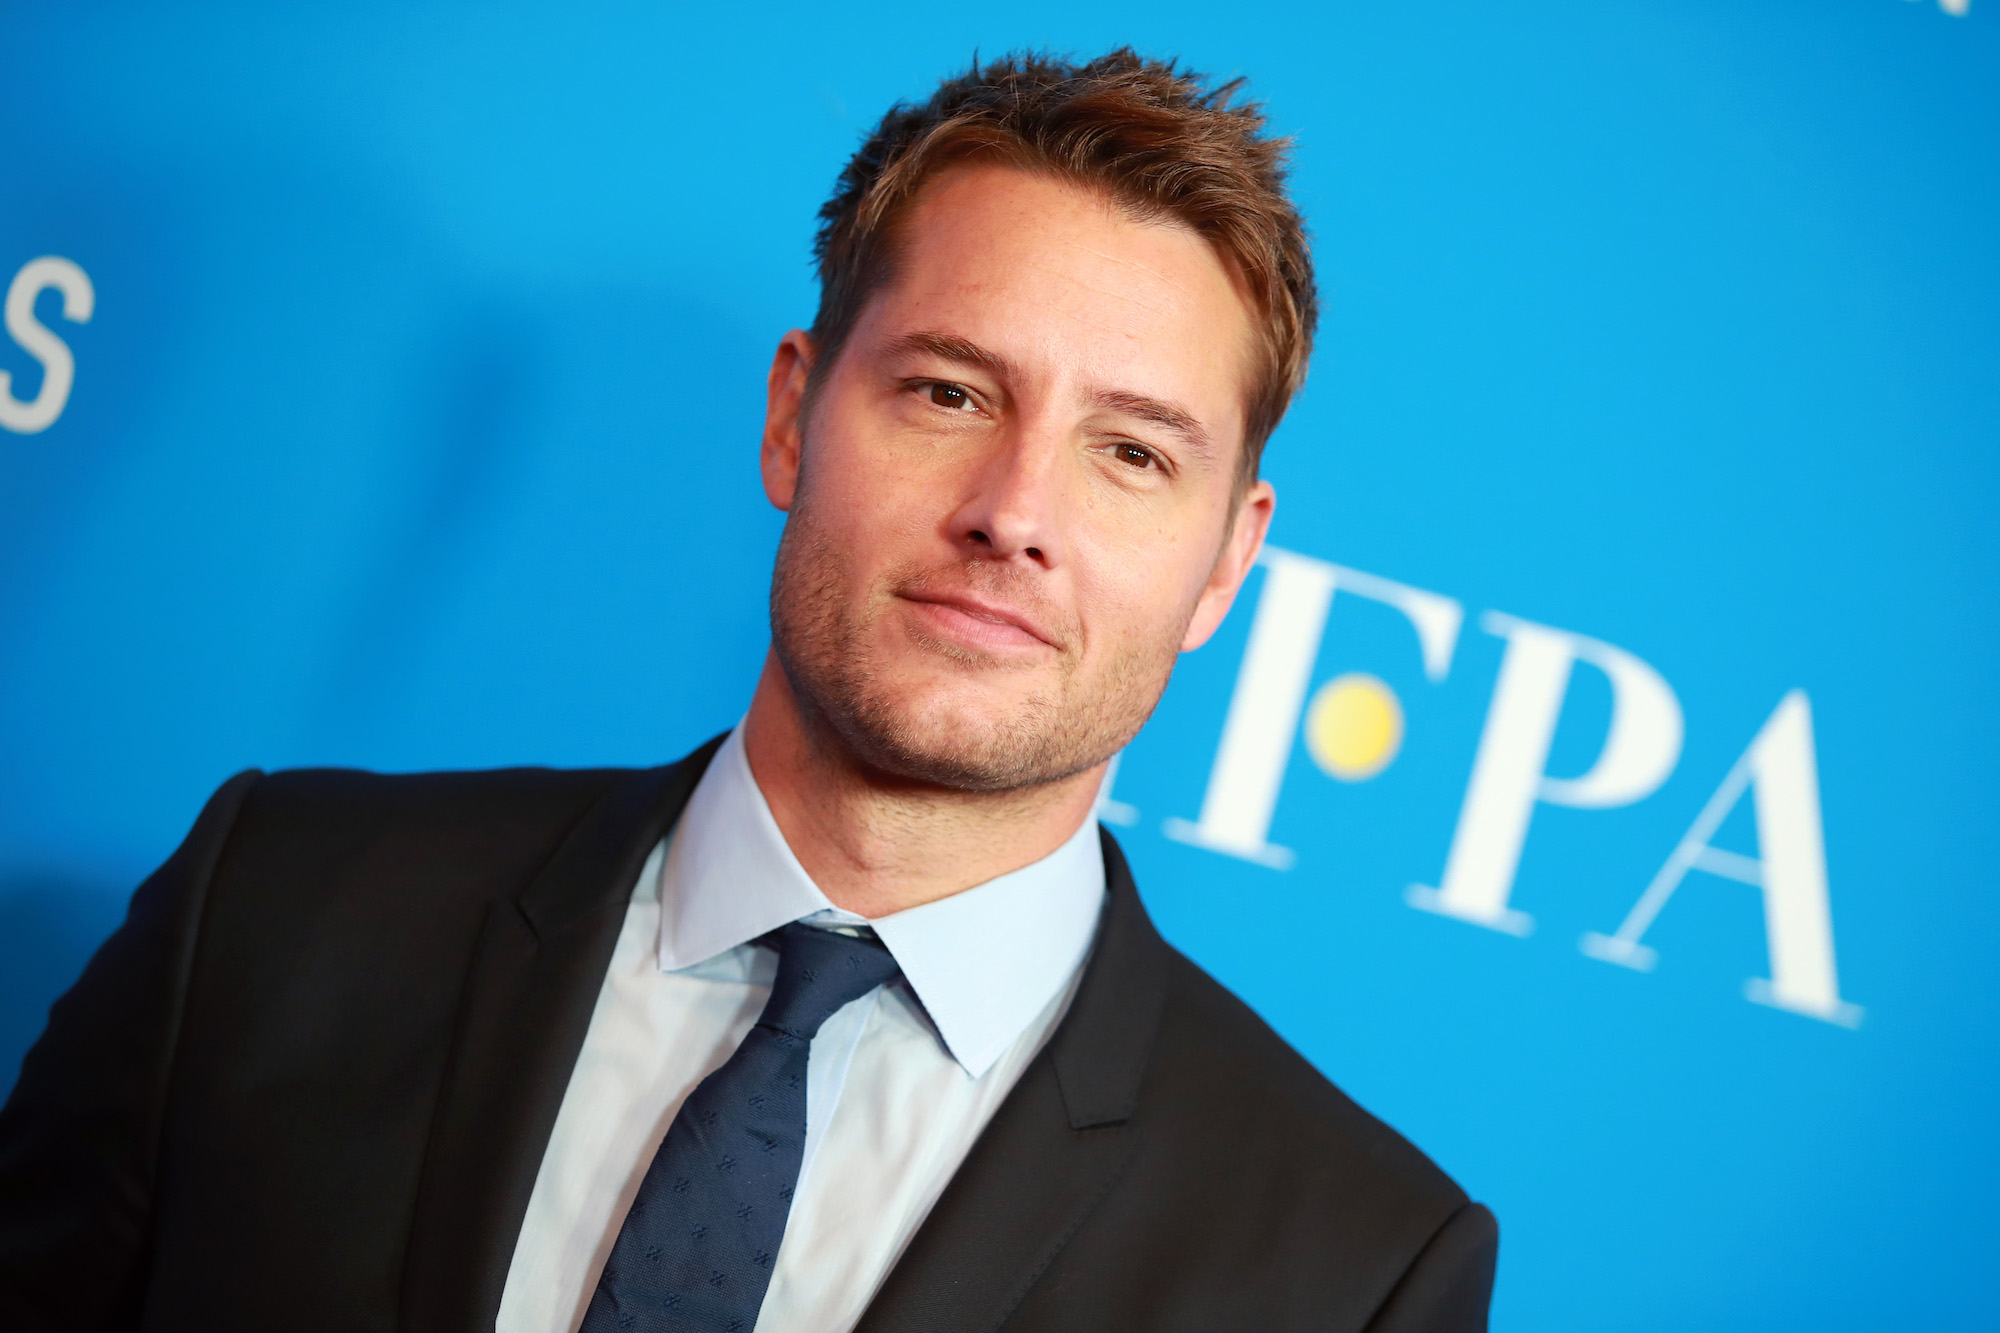 Justin Hartley smiling in front of a blue background